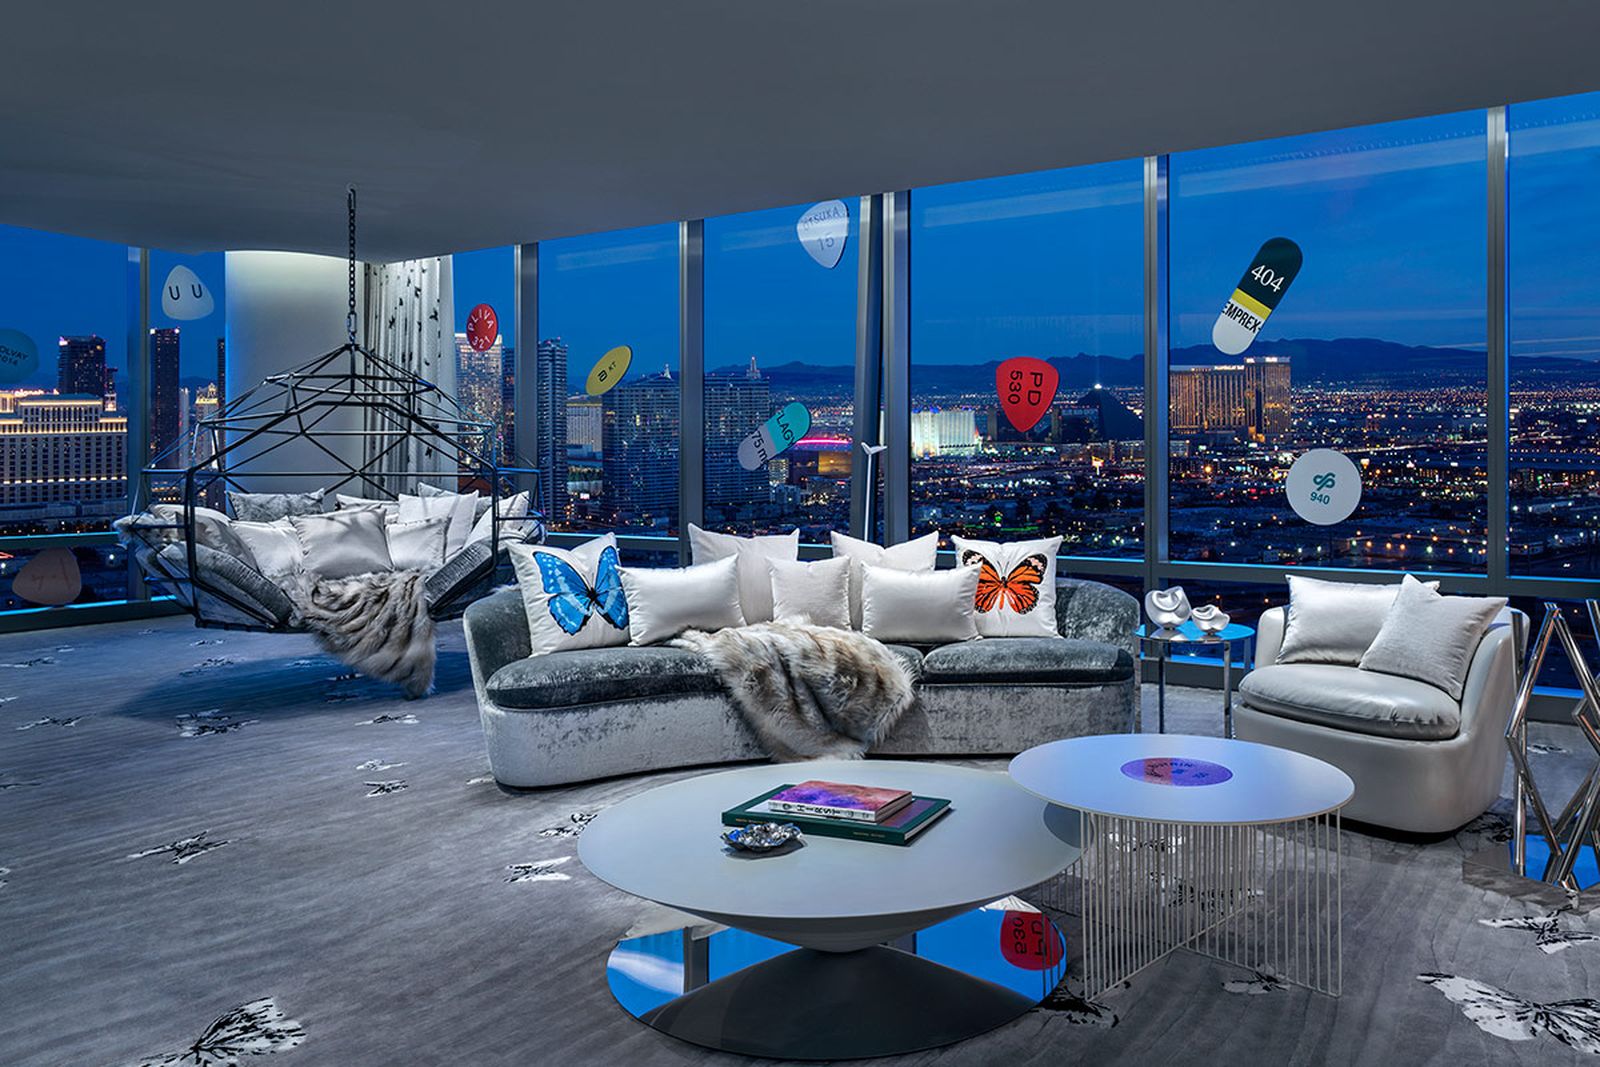 insane creative process behind worlds expensive hotel room Tal Cooperman damien hirst the palms